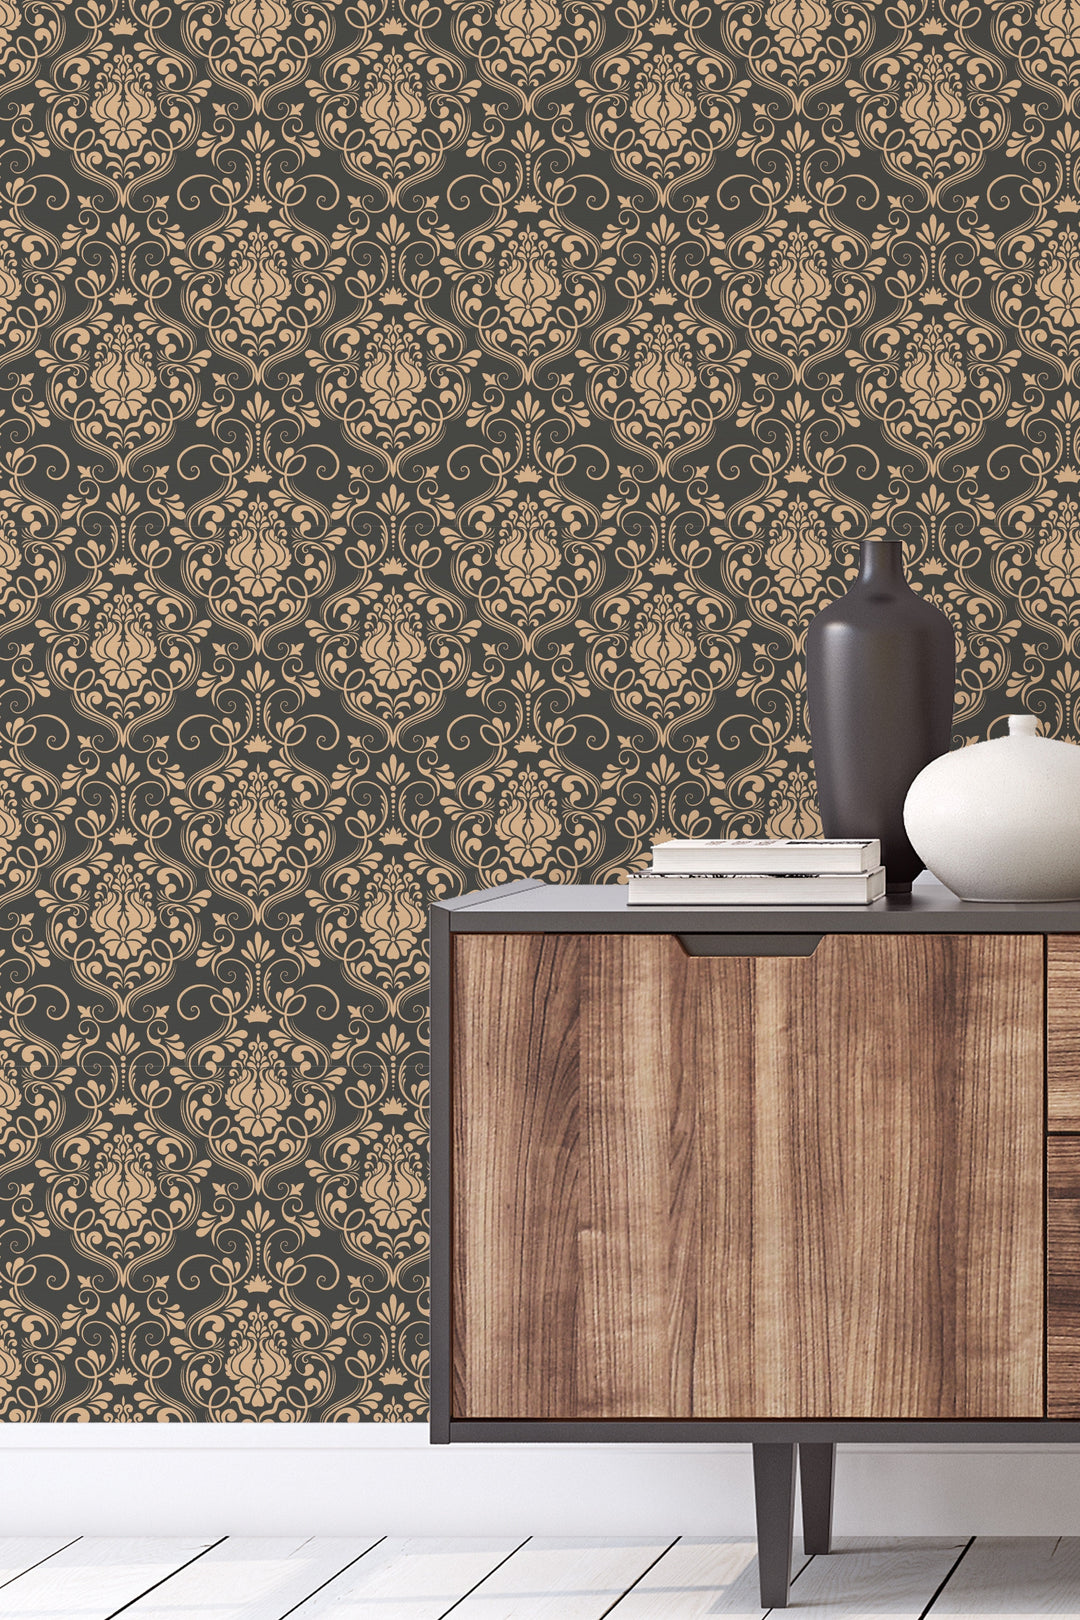 Damask style on dark background, Peel & Stick Wallpaper - Removable Self Adhesive and Traditional wallpaper #3327